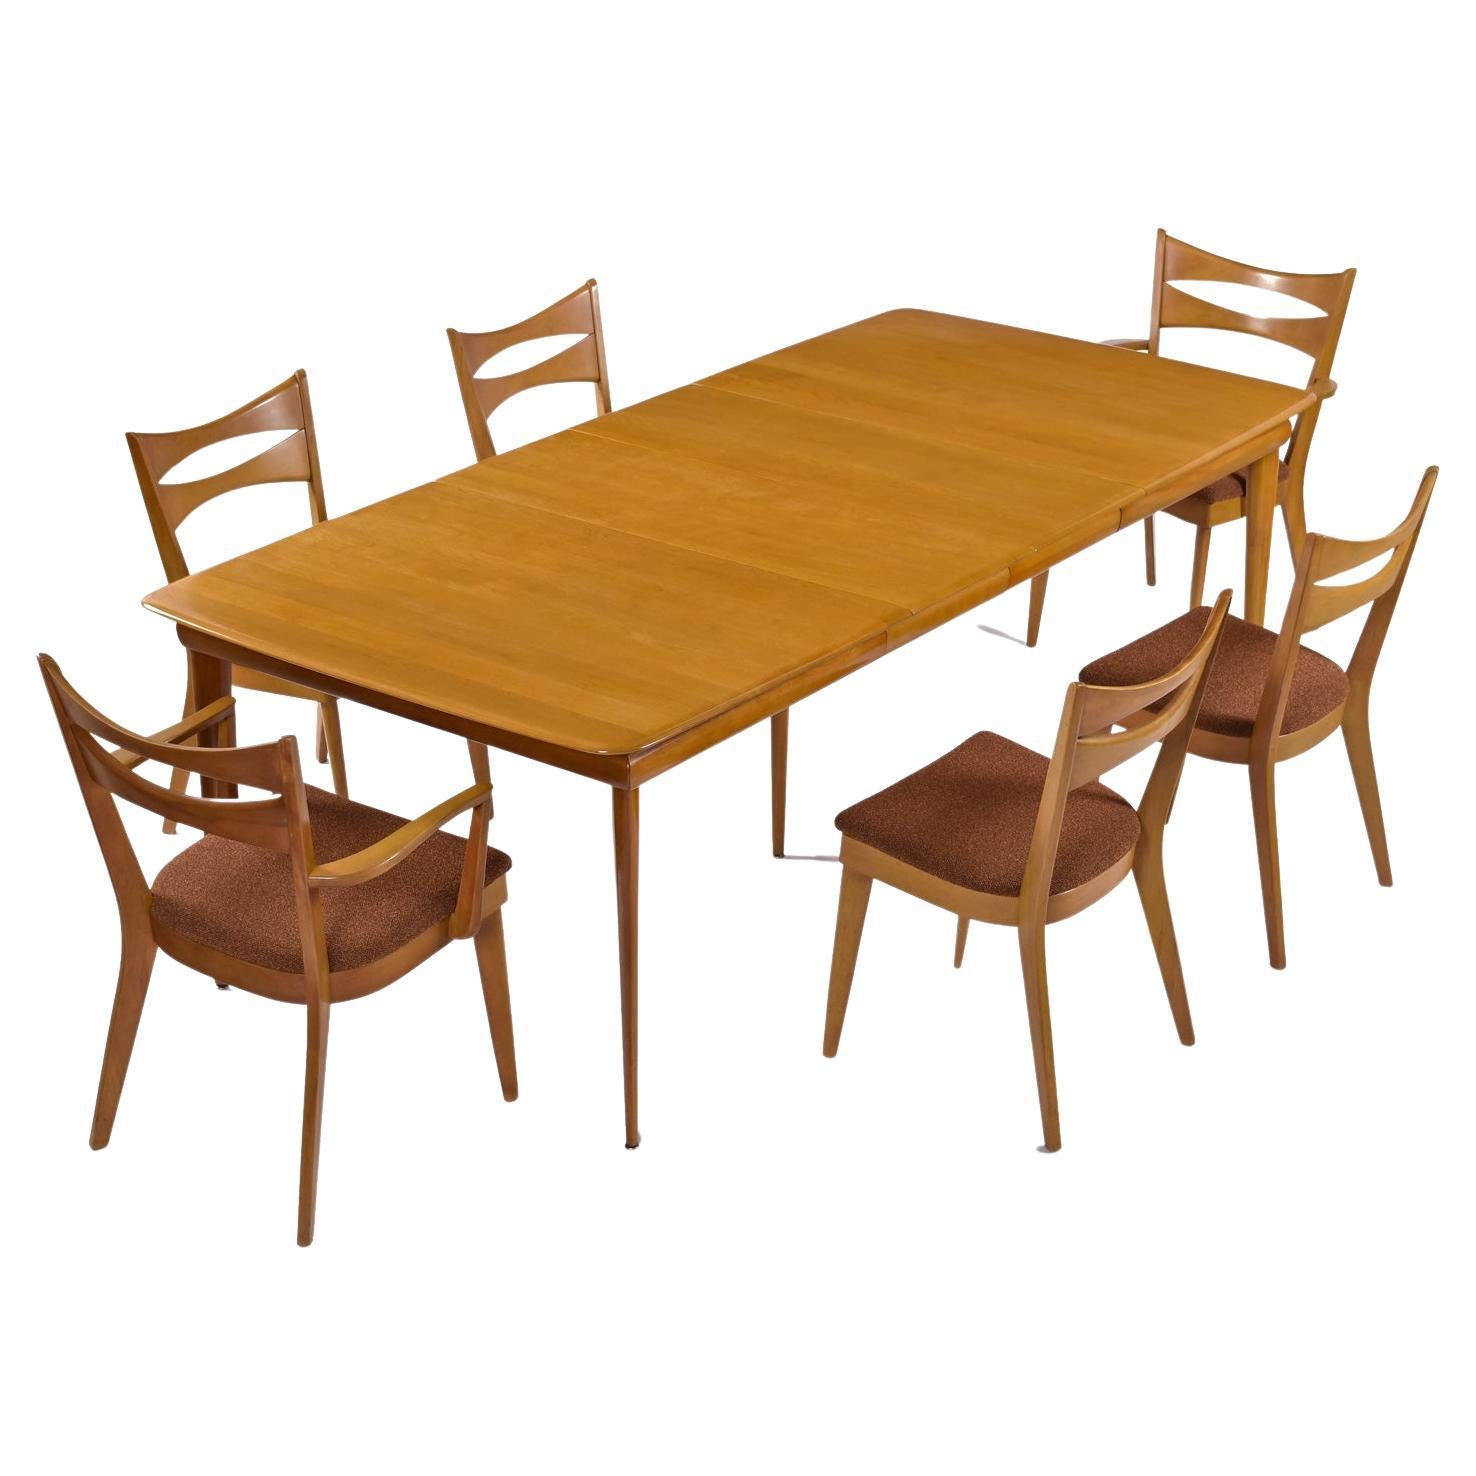 Heywood Wakefield Dining Table Set with '6' M1553 Cat’s Eye Dining Chairs